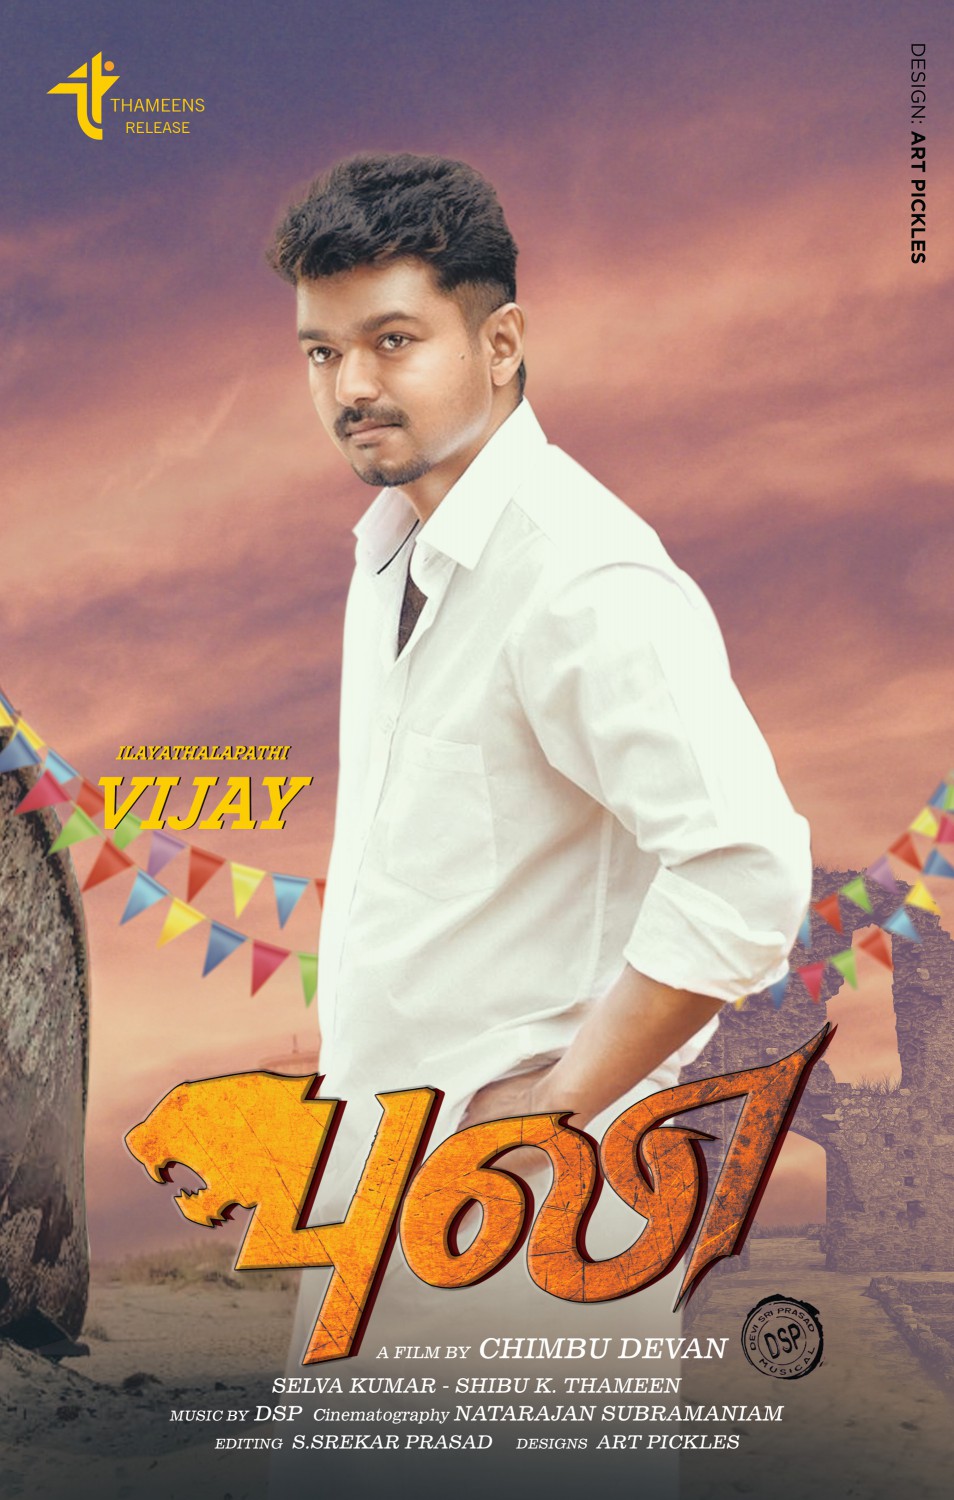 Extra Large Movie Poster Image for Puli 